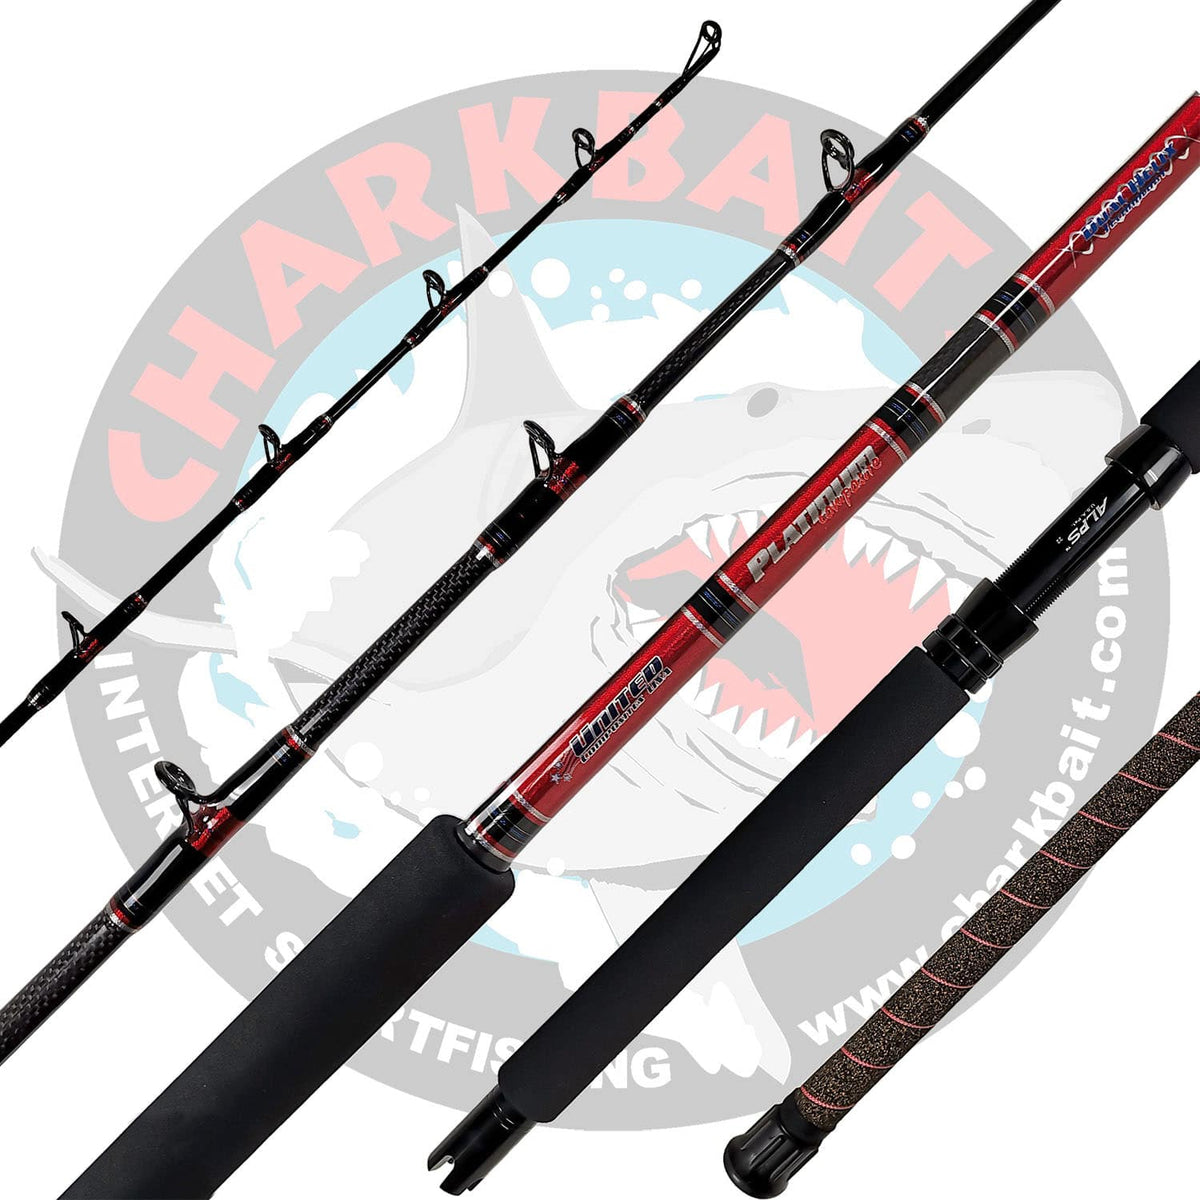 United Composites RUS GUSA Conventional Rods — Charkbait